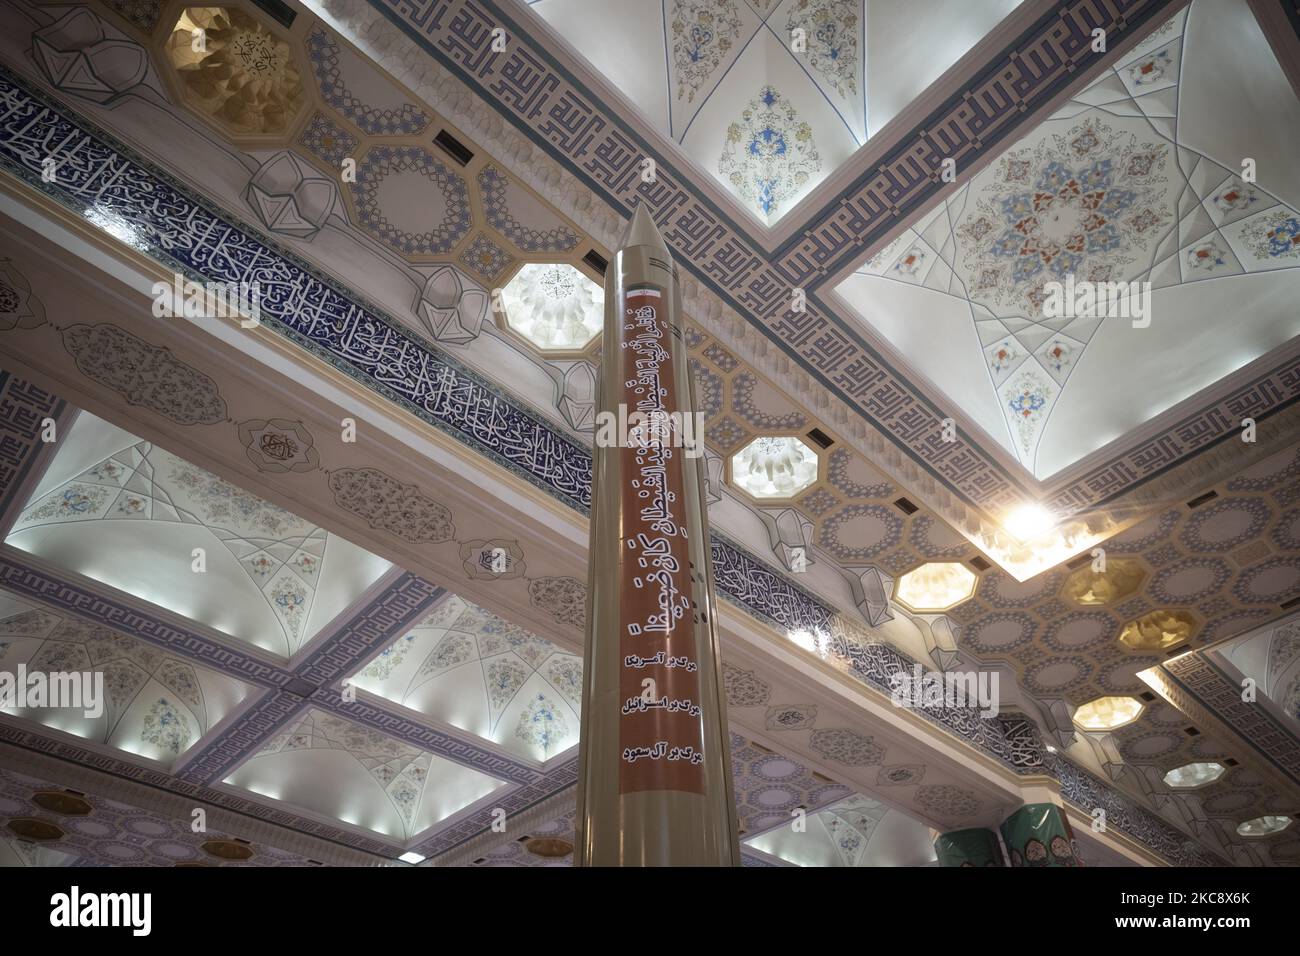 File Photo shows, A model of the Iranian surface-to-surface missile, Shahab-3, with anti-U.S., anti-Israel and anti-Saudi Arabia slogans is displayed at the Defensive Achievements Exhibition of the 40th anniversary of the Islamic Revolution in Imam Khomeini Grand Mosque in central Tehran on the second day of ten-day celebration of Islamic Revolution anniversary, February 2, 2019. (Photo by Morteza Nikoubazl/NurPhoto) Stock Photo